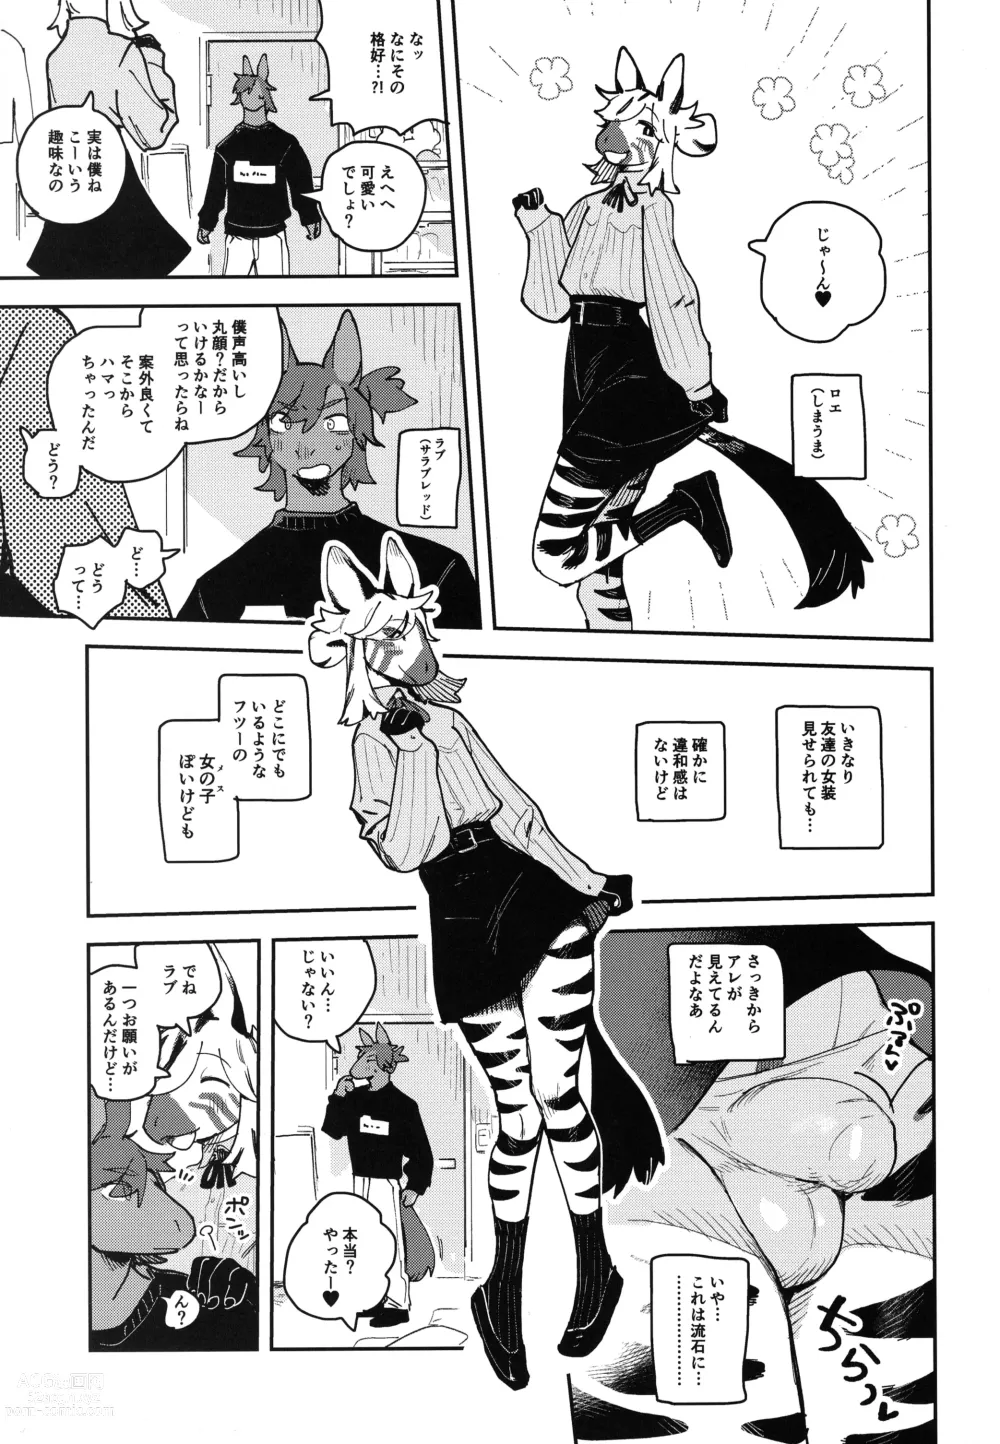 Page 7 of doujinshi HORNY HORSE